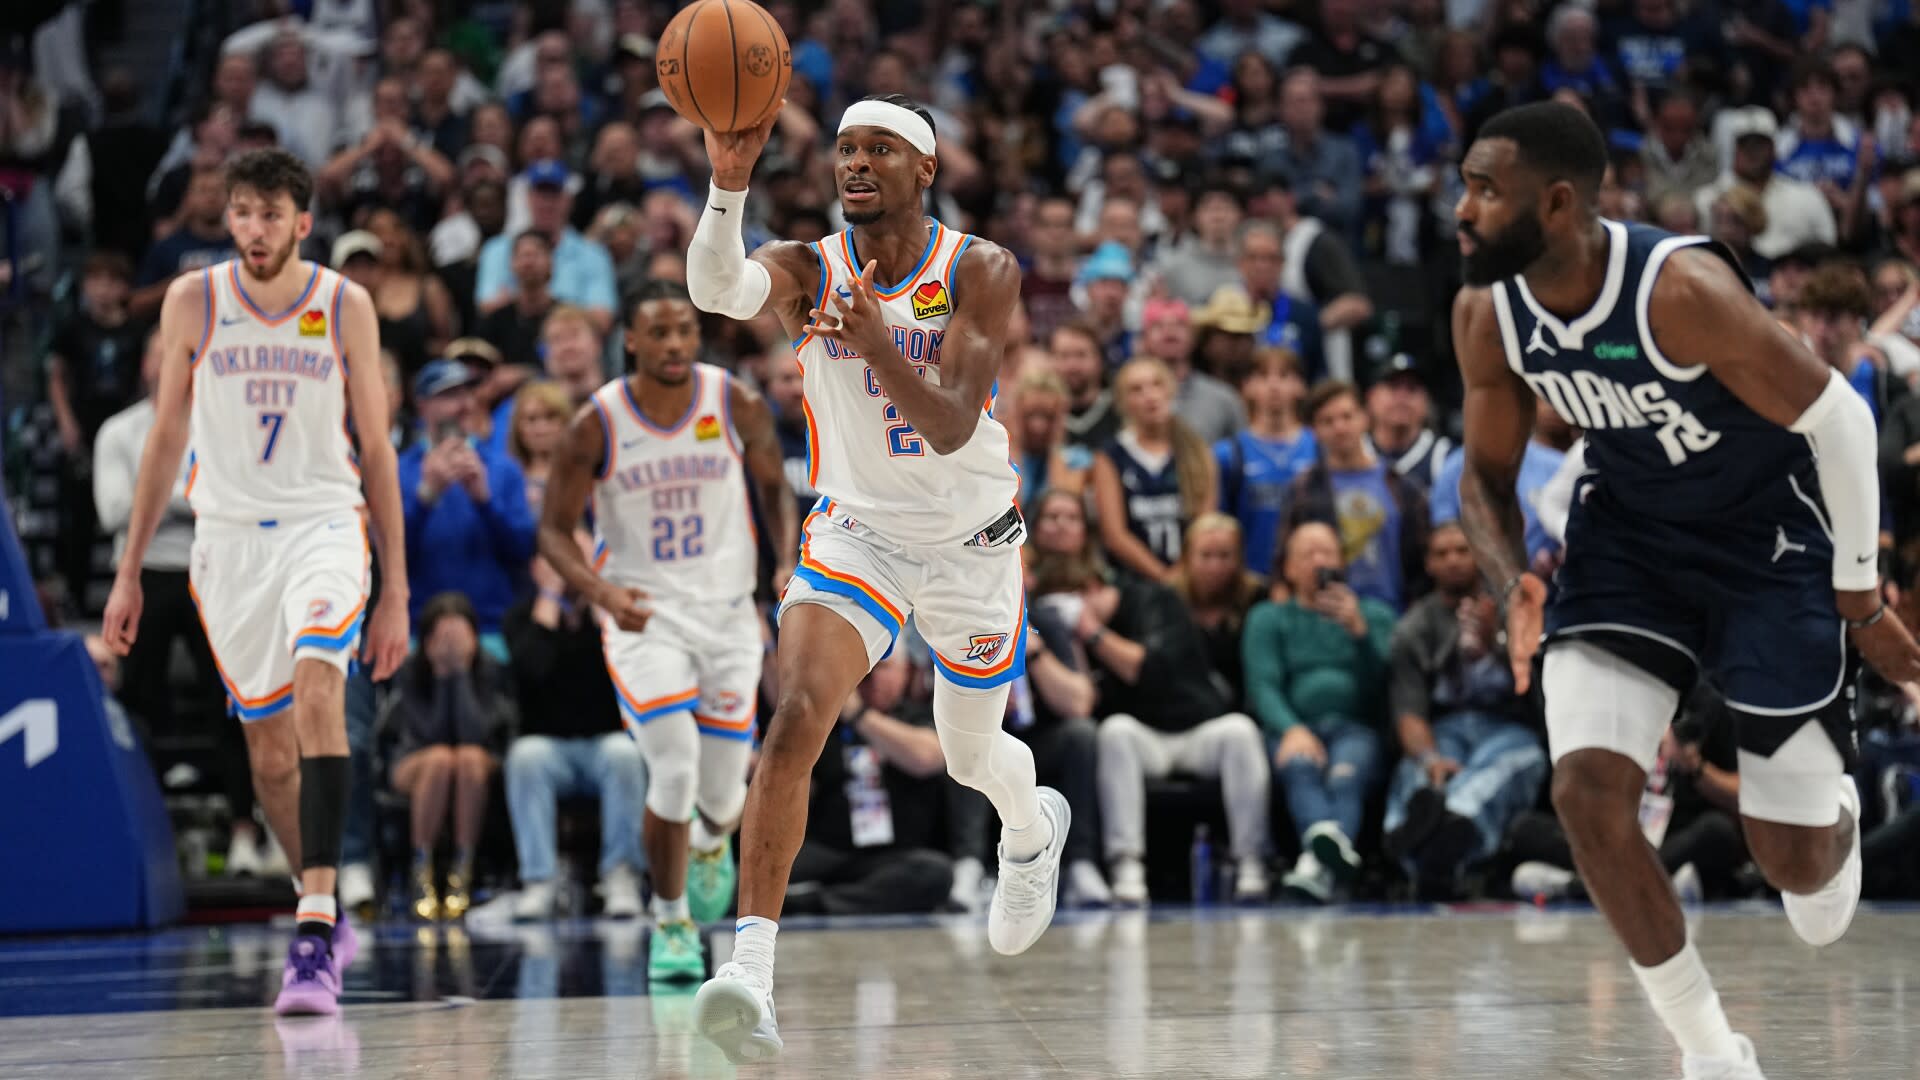 Gilgeous-Alexander takes over late, sparks Thunder comeback in Dallas to win Game 4, even series